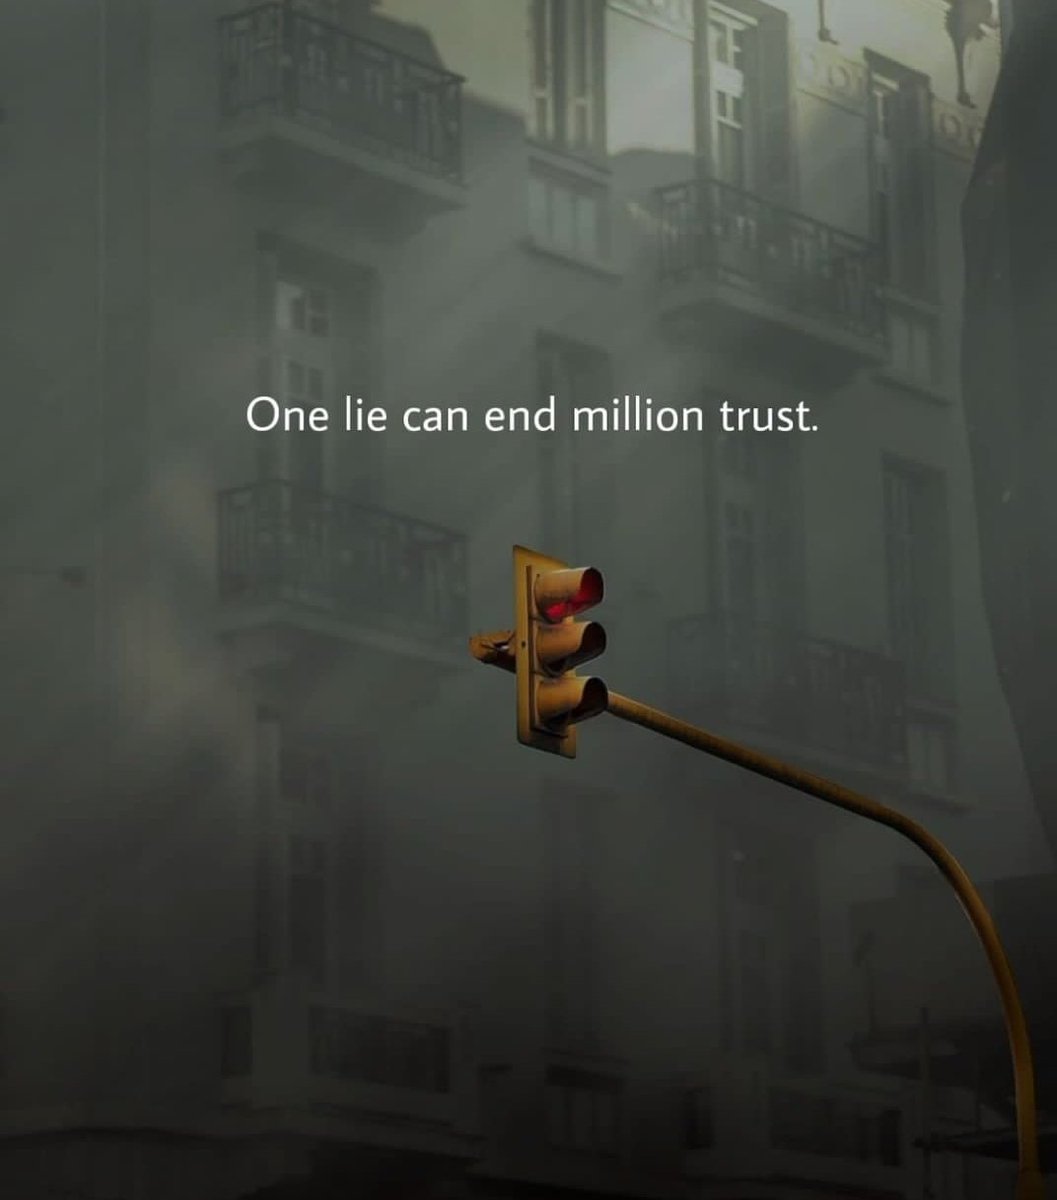 A lie can destroy a relationship in a second, but it can take a lifetime to rebuild the trust